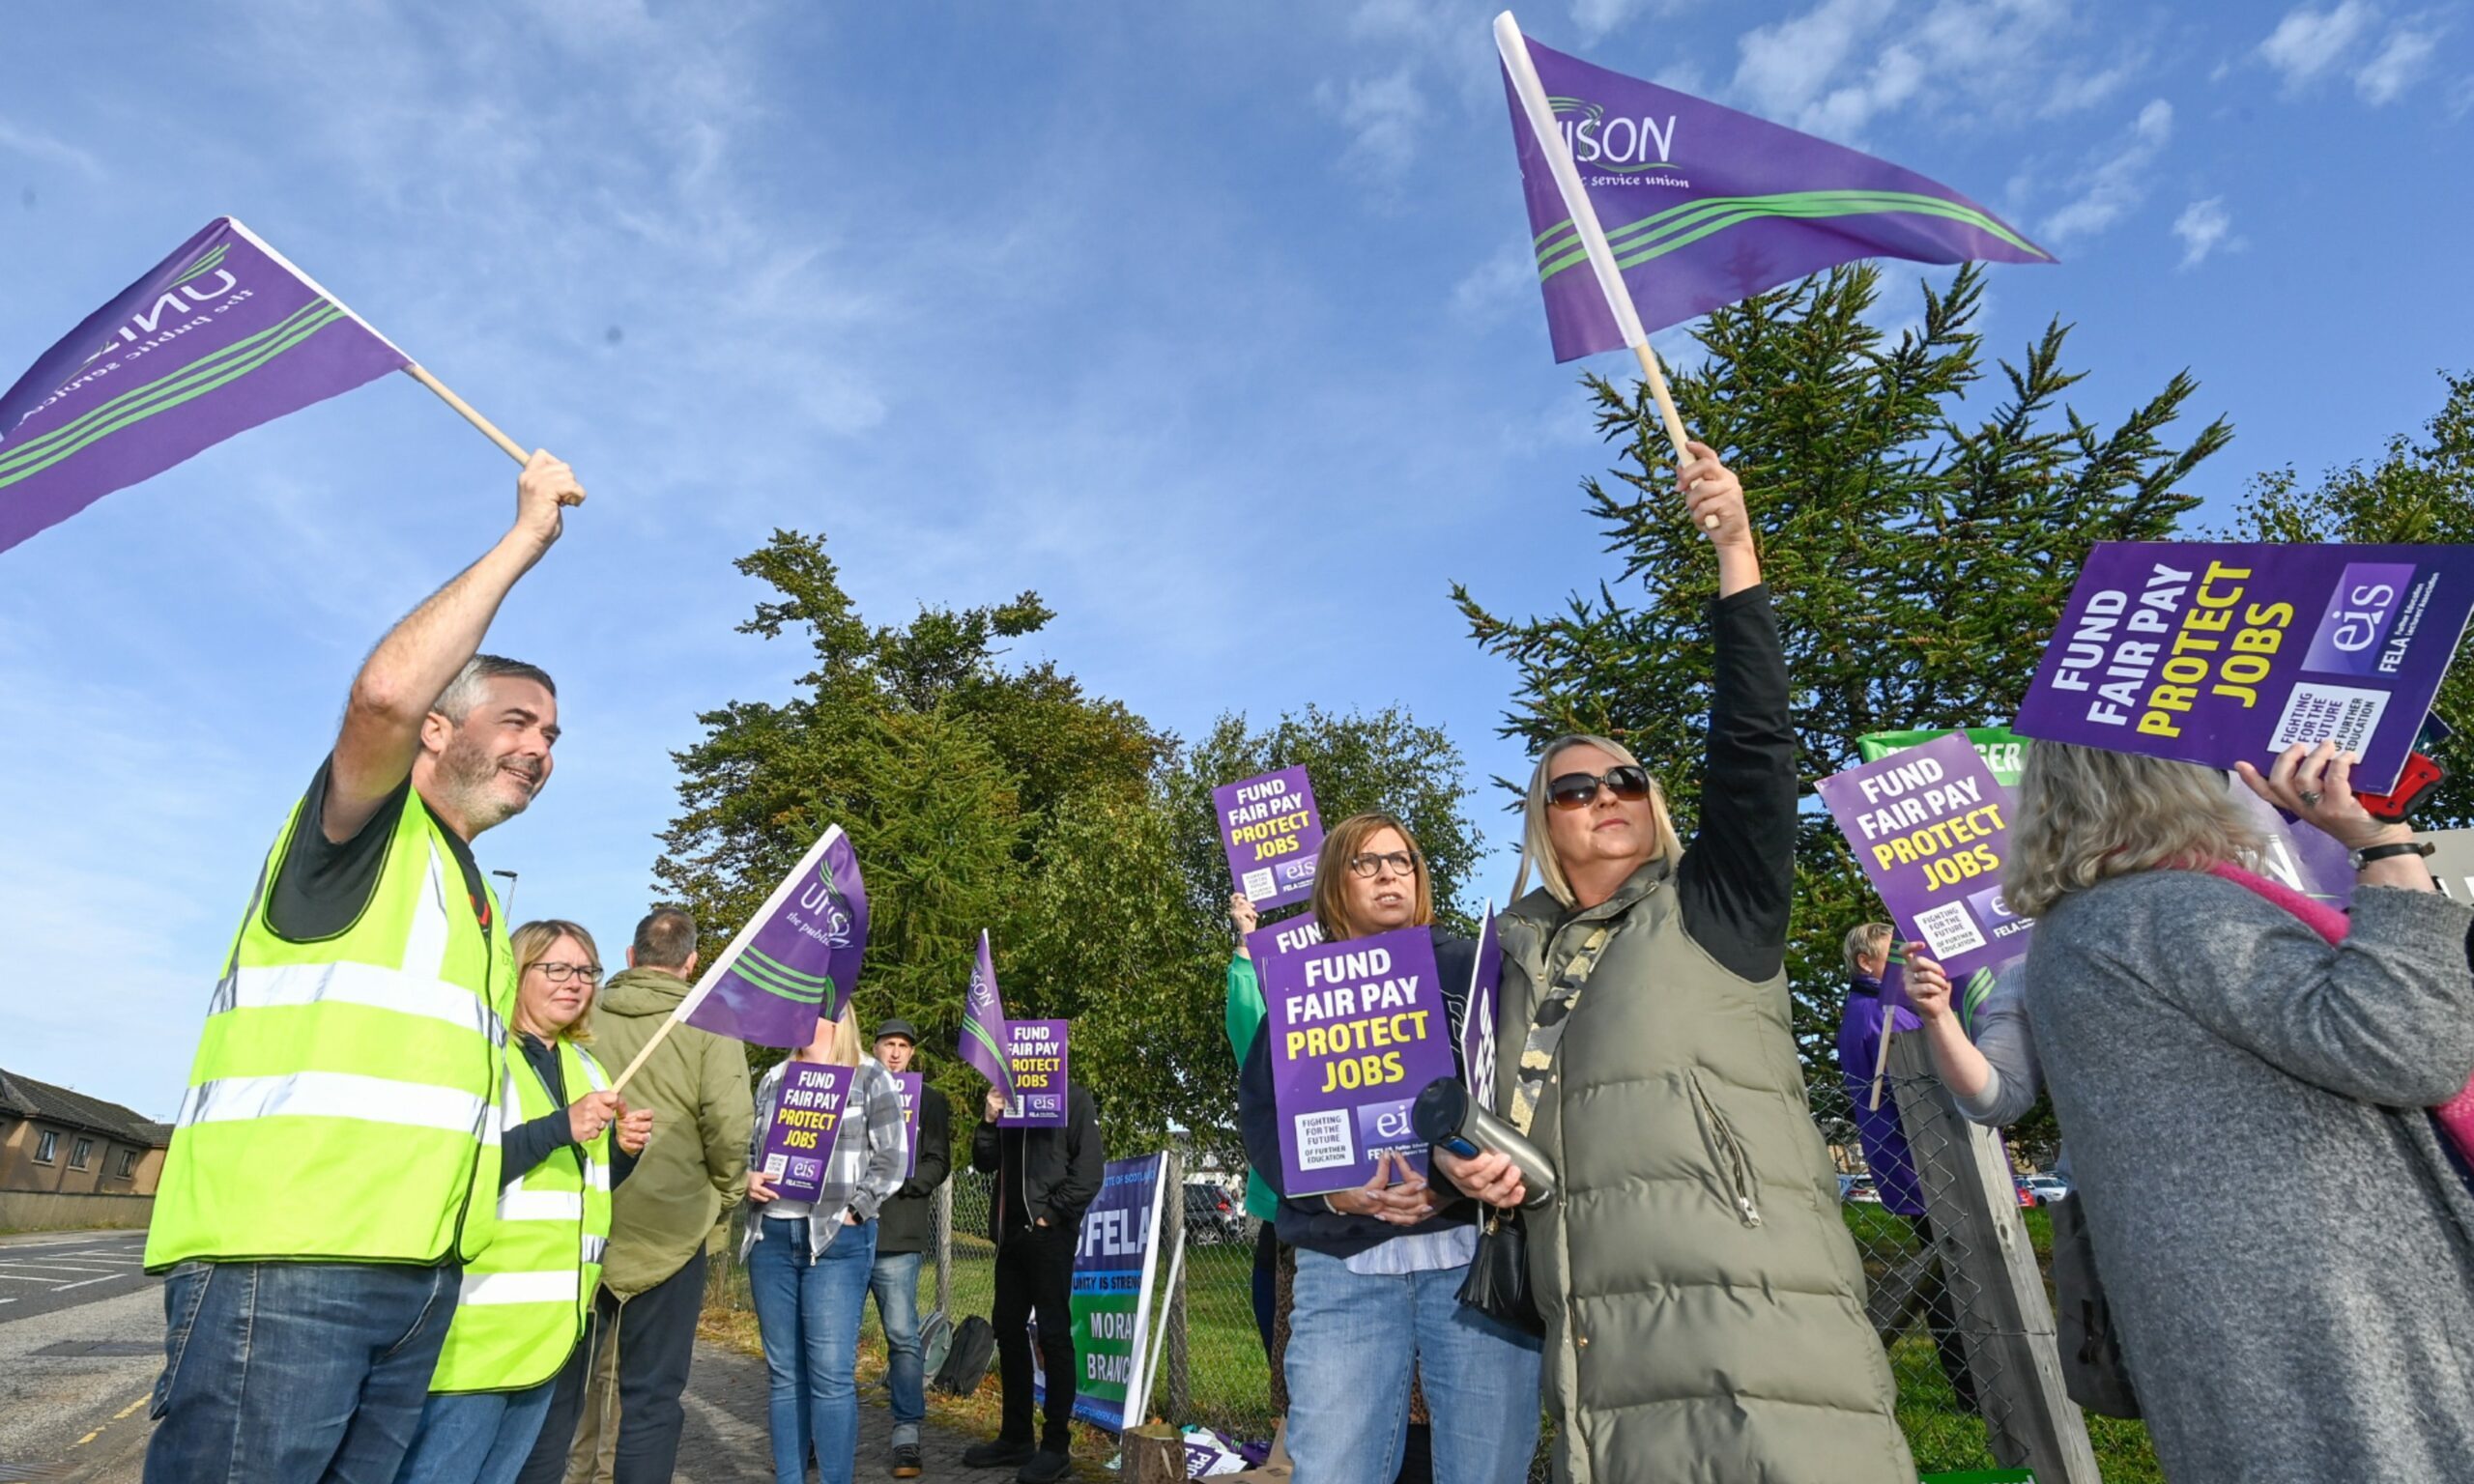 UHI Moray staff on the picket line waving Unison flags and banners.